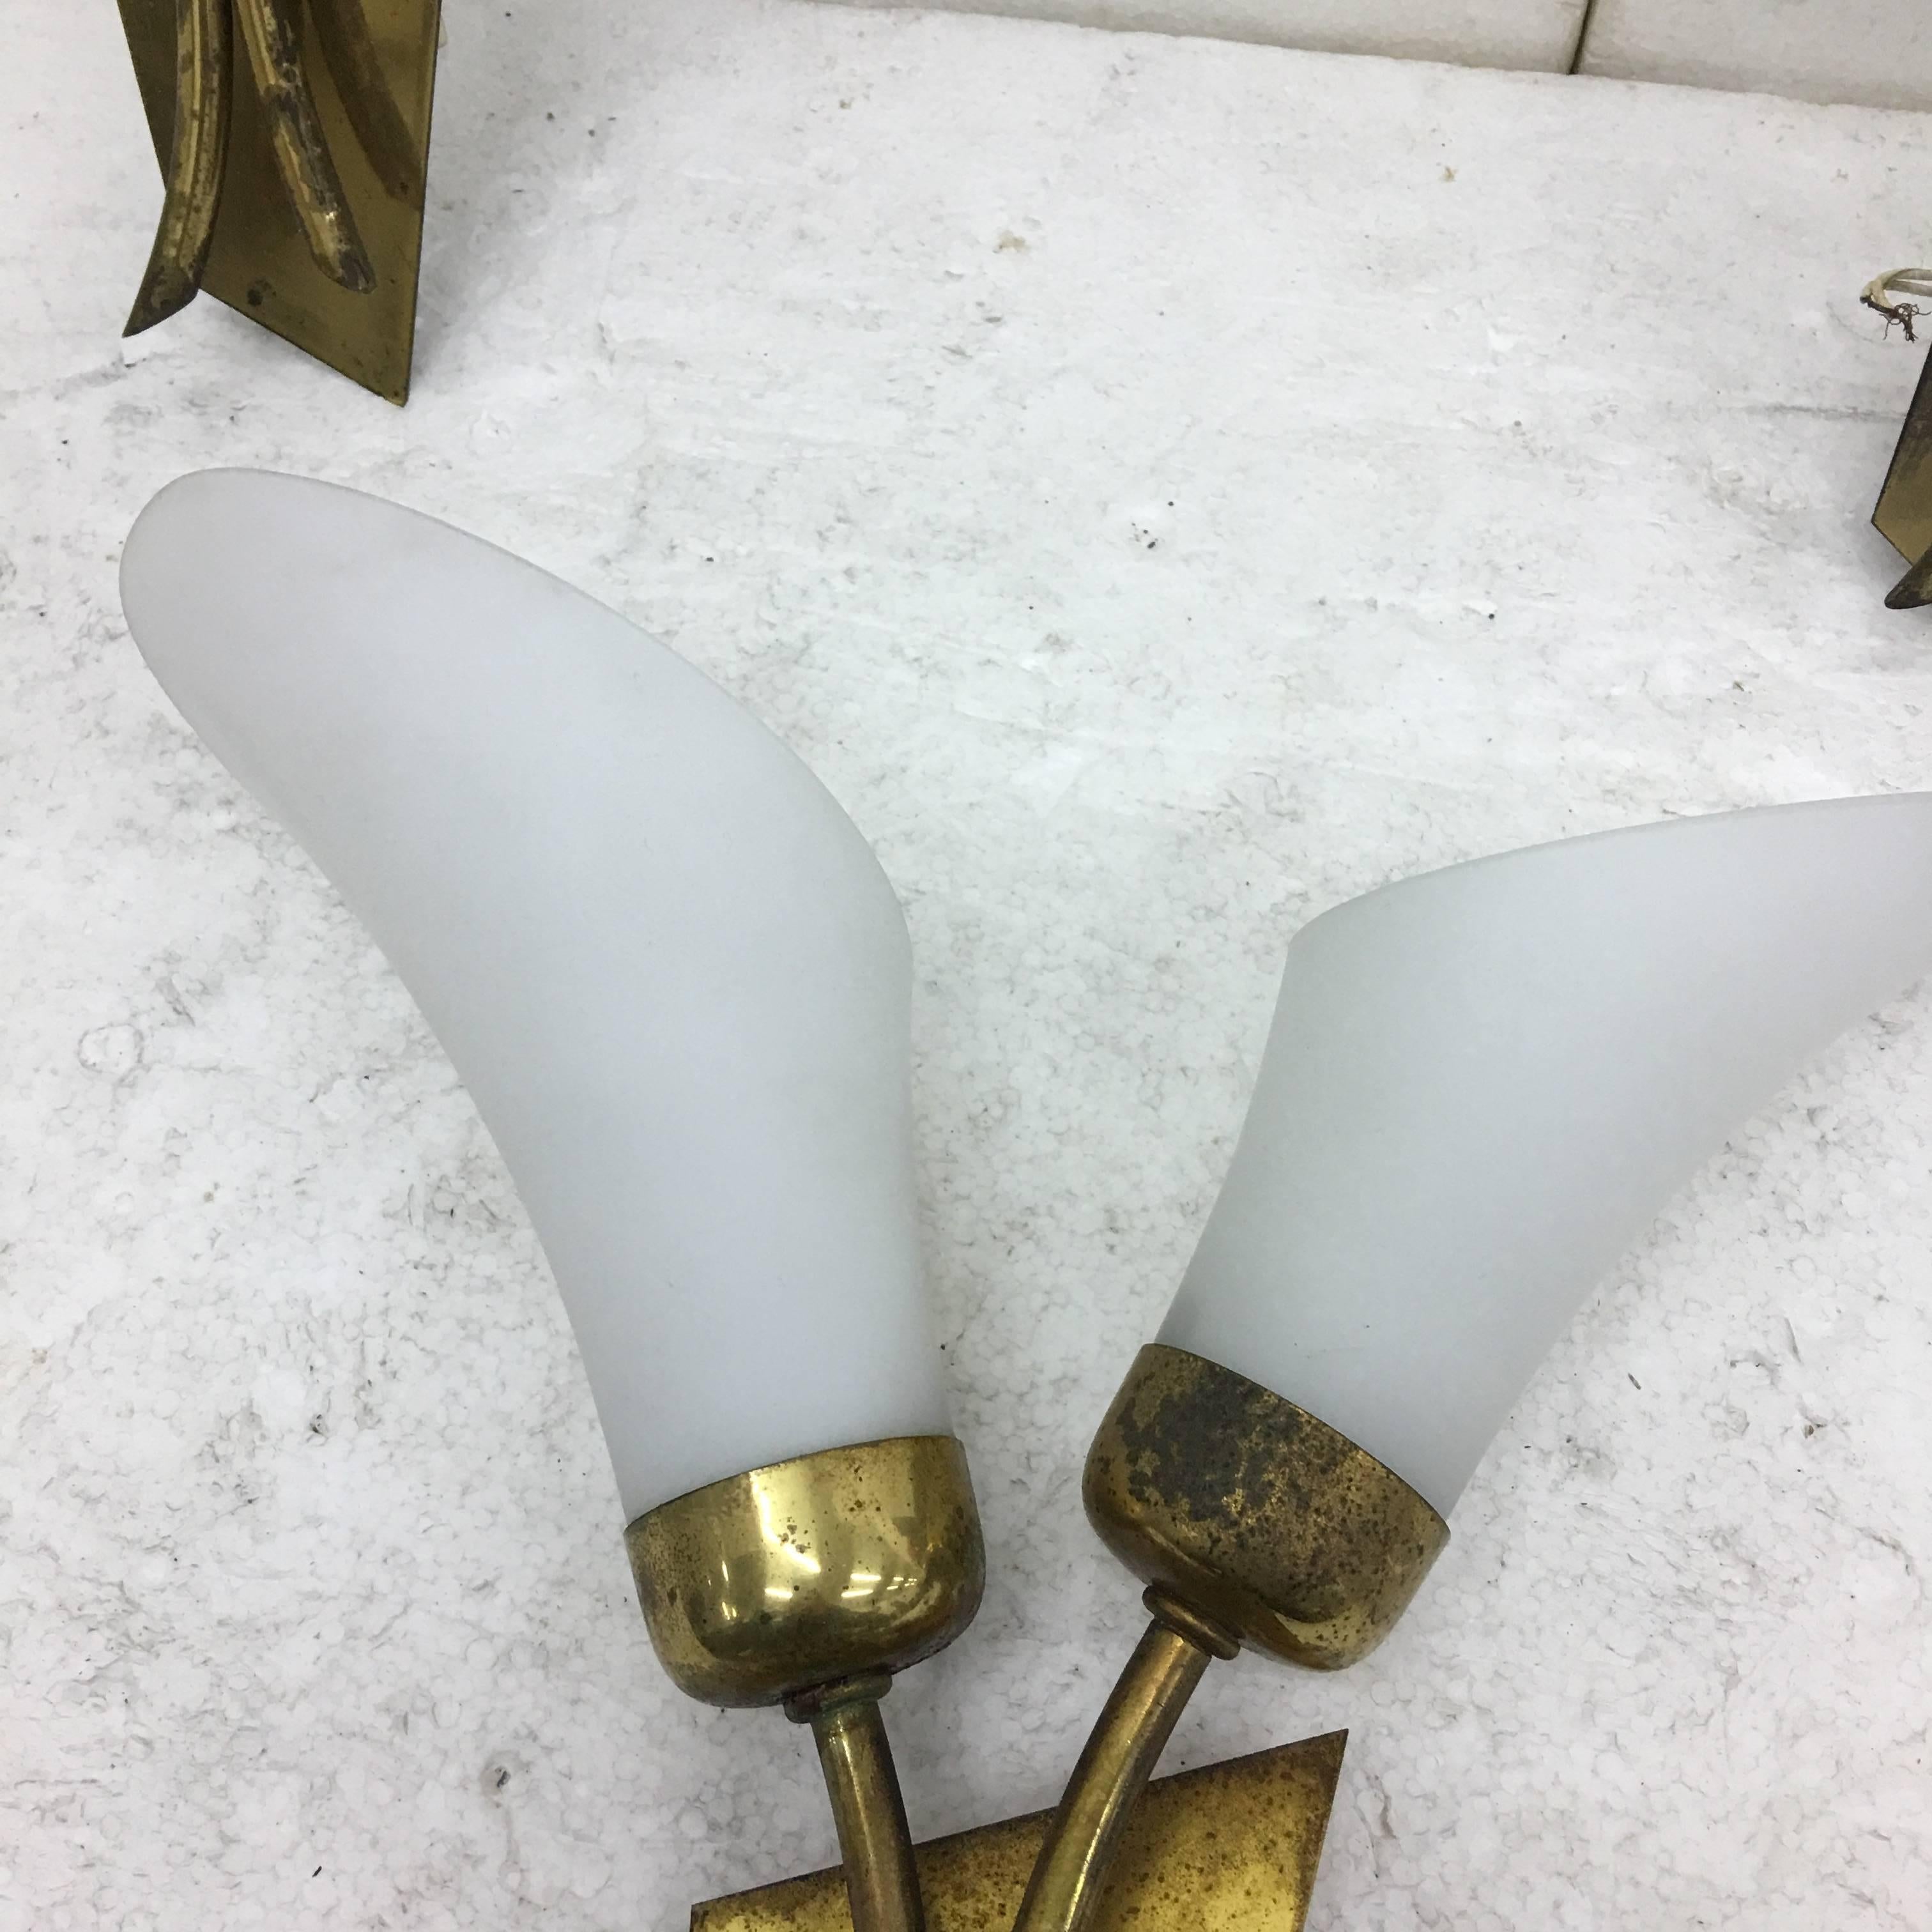 Nice set of Italian brass and white glass wall lights in original patina.
They work with both 110 and 220 Volt.